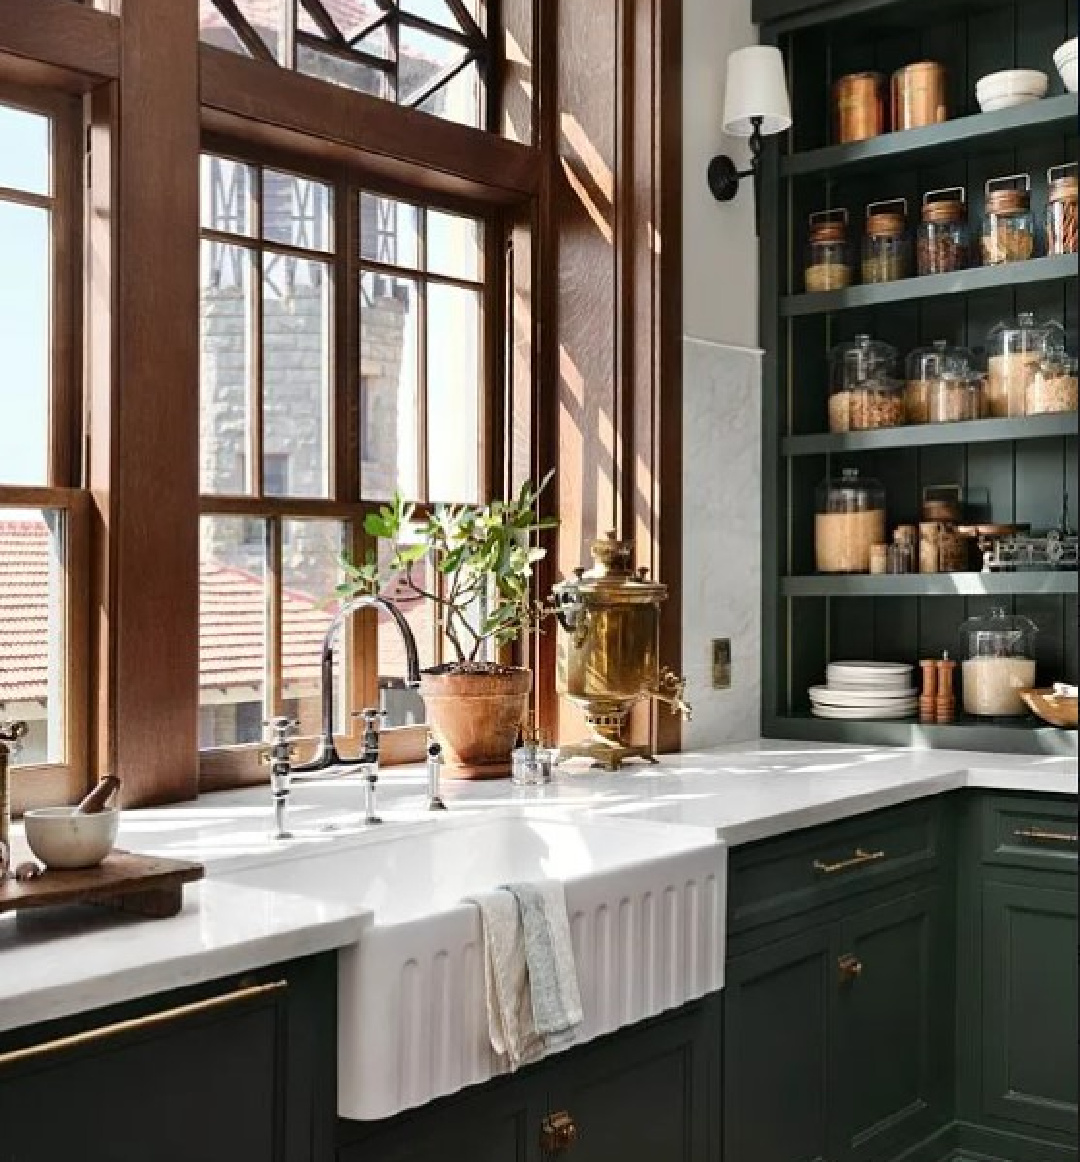 Cottage Grove (a moody navy with deep green paint color by Kilz - Magnolia's Castle Collection by Joanna Gaines) in butler pantry of Fixer Upper The Castle (Waco, TX). #thecastle #fixerupperthecastle